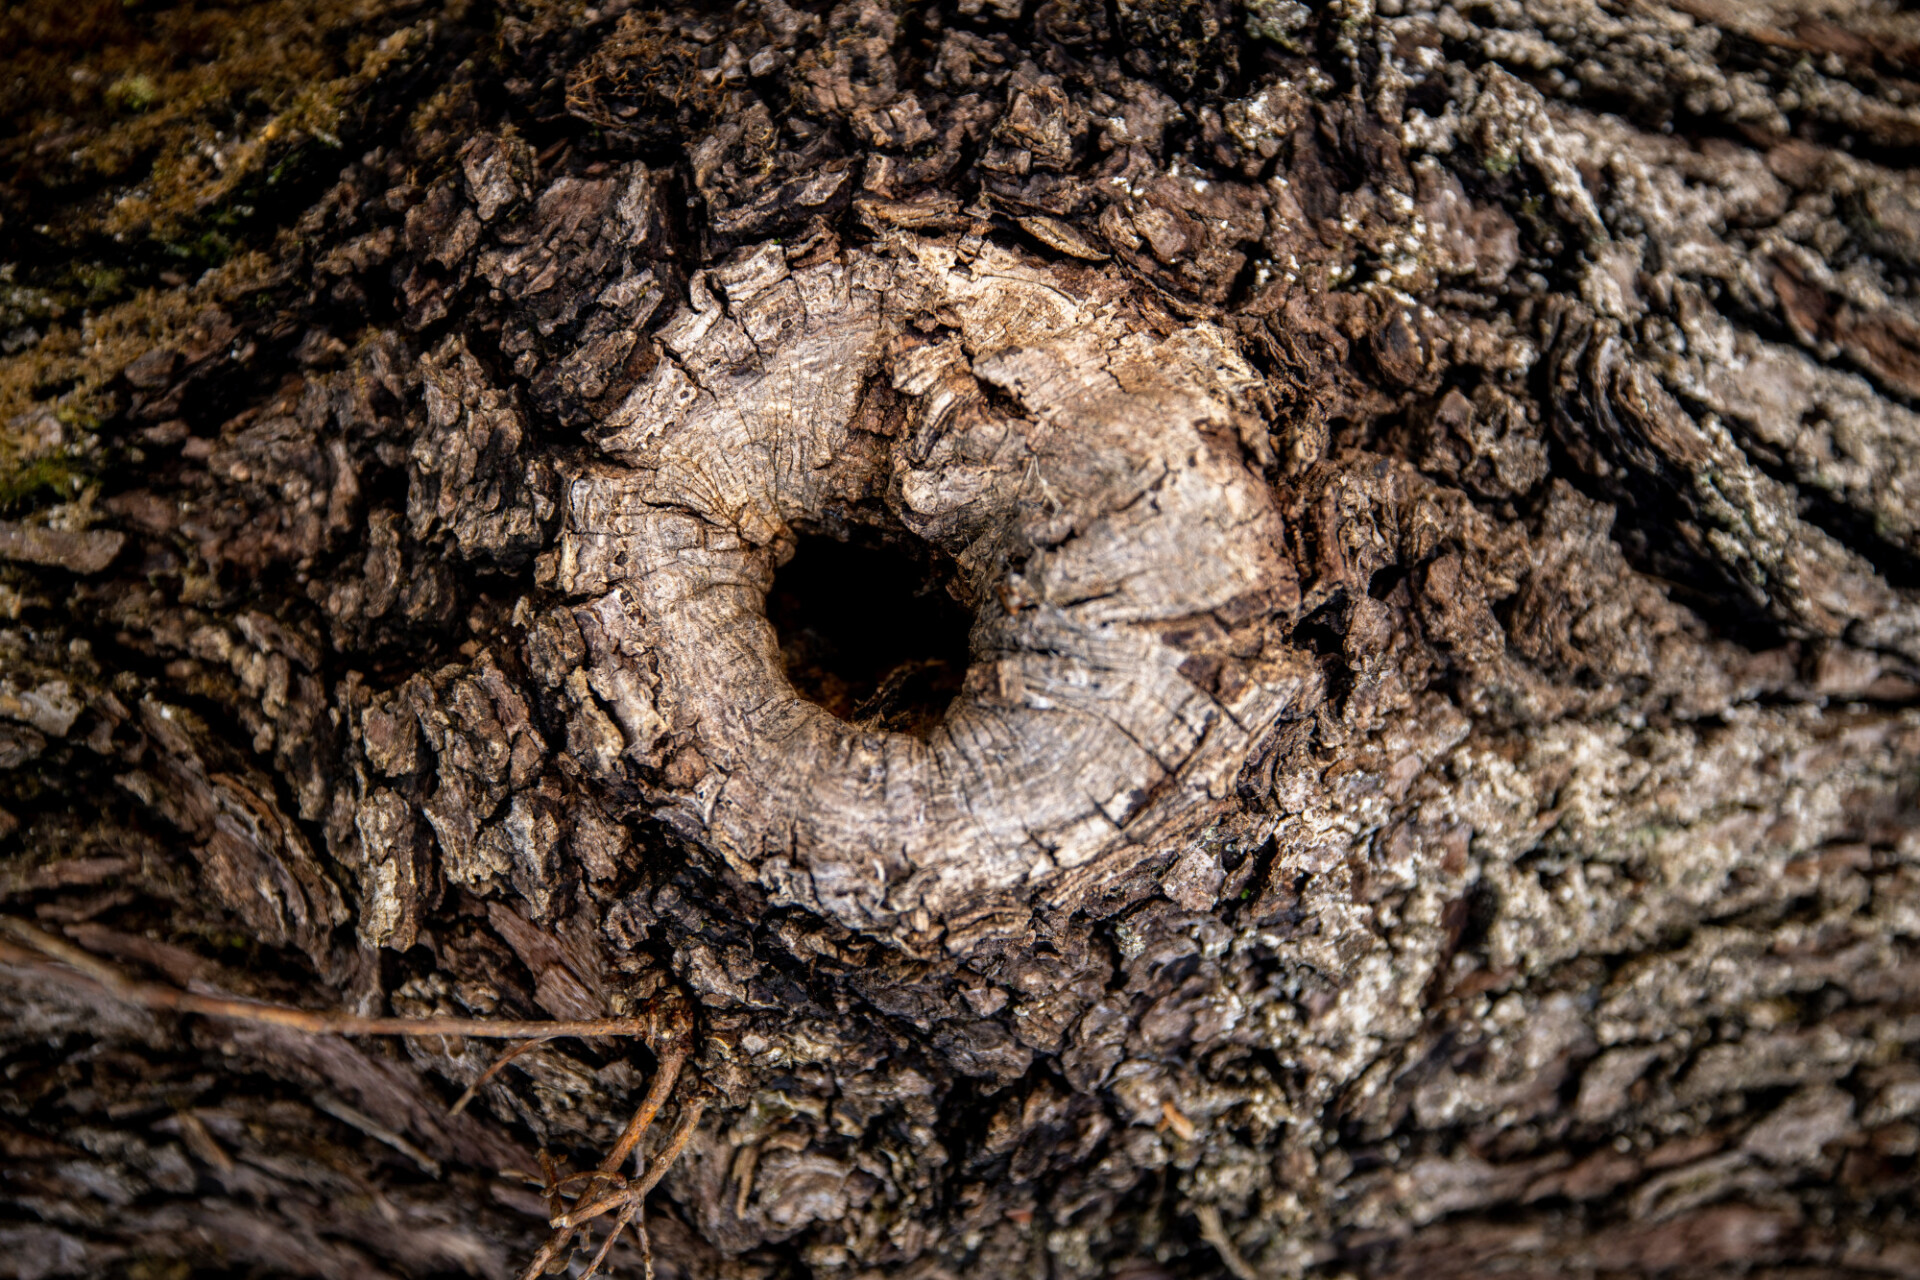 Hole in a tree